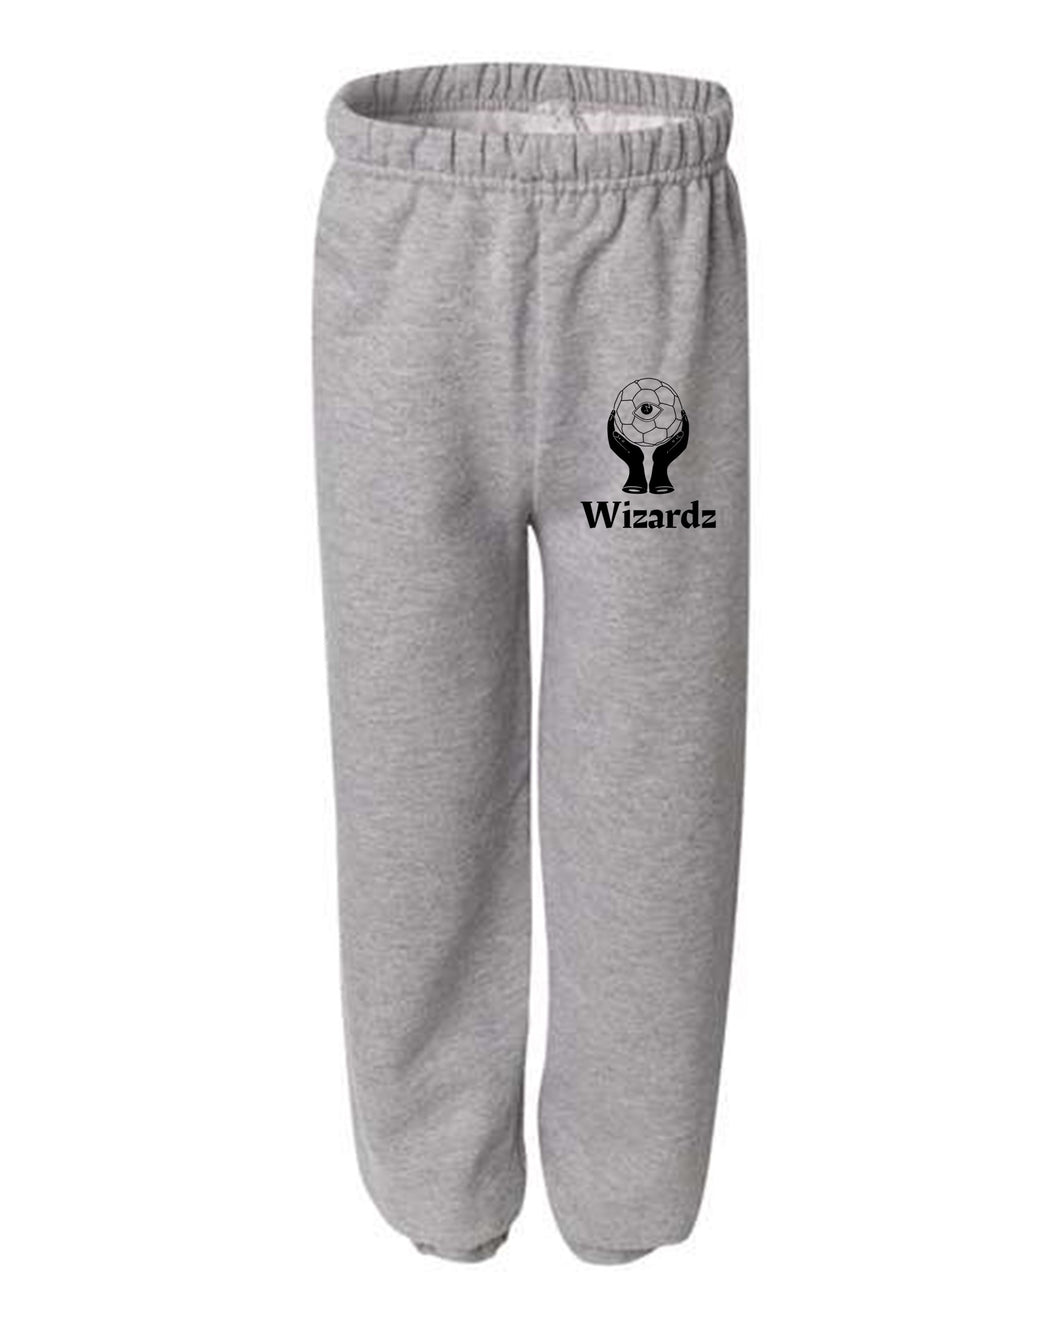 Wizardz Soccer Sweatpants (Youth and Adult)